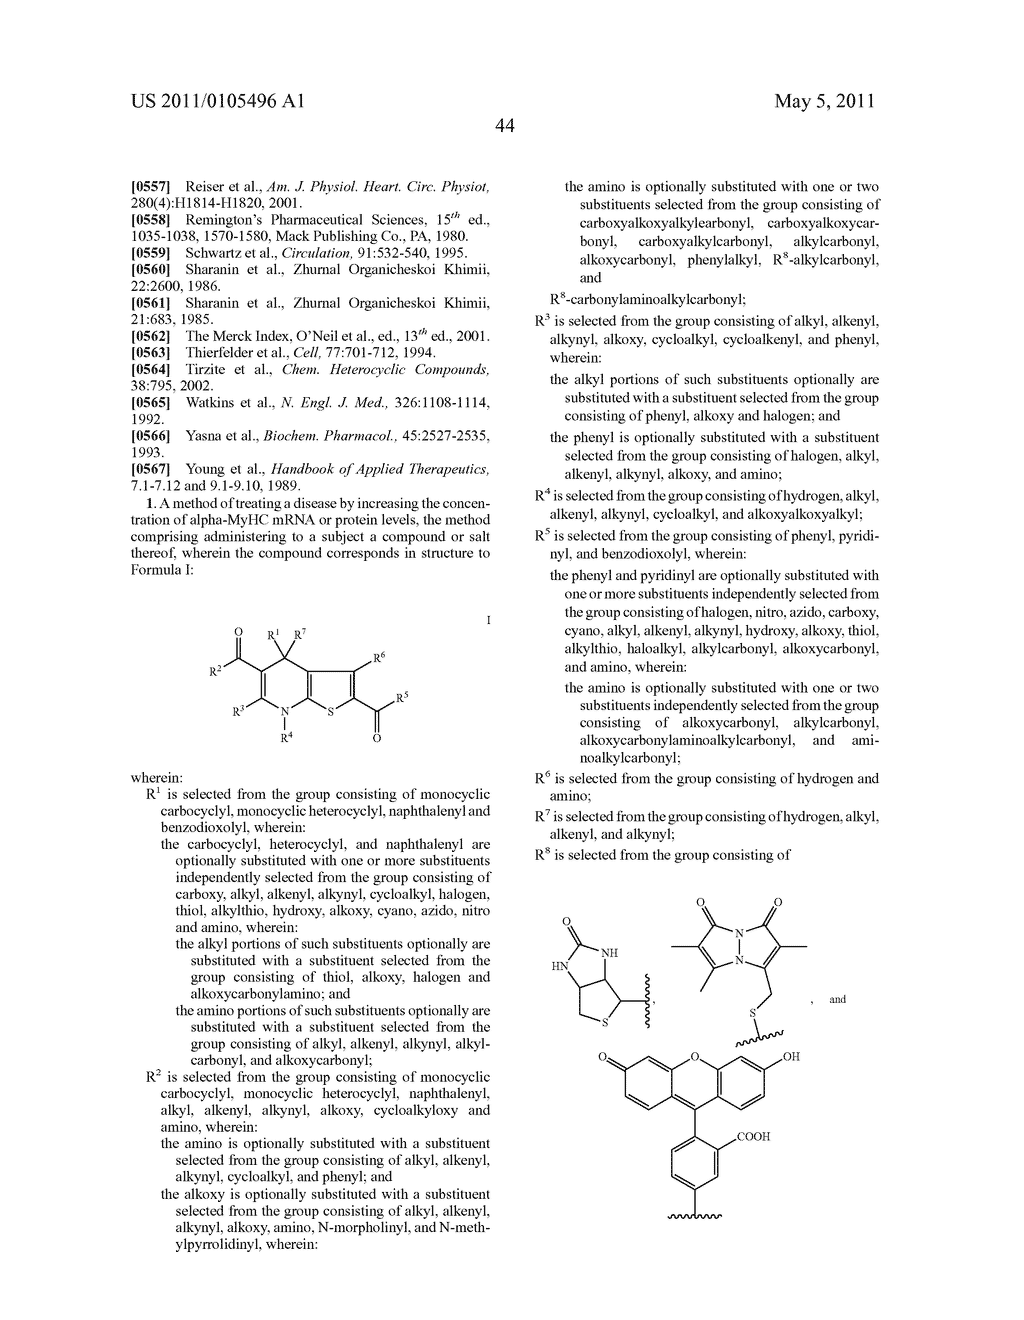 Methods For The Treatment Of Myosin Heavy Chain-Mediated Conditions Using 4,7-Dihydrothieno[2,3-B]Pyridine Compounds - diagram, schematic, and image 46